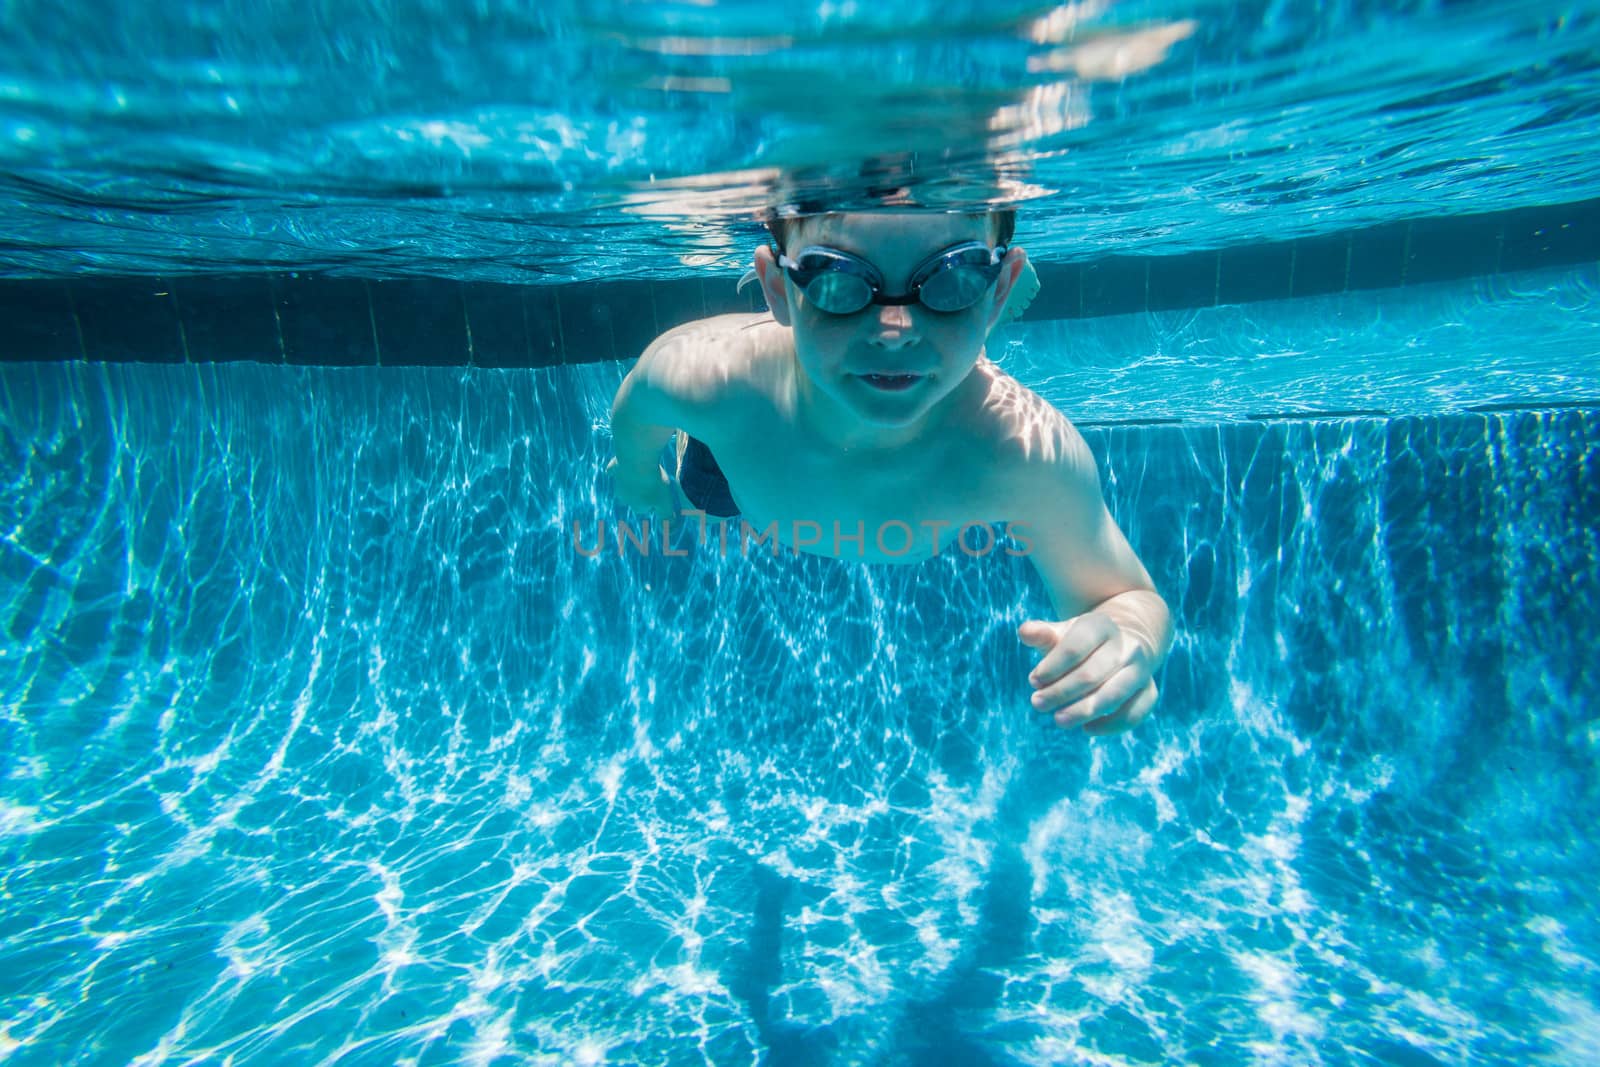 Young boy wearing goggles underwater in swimming pool.